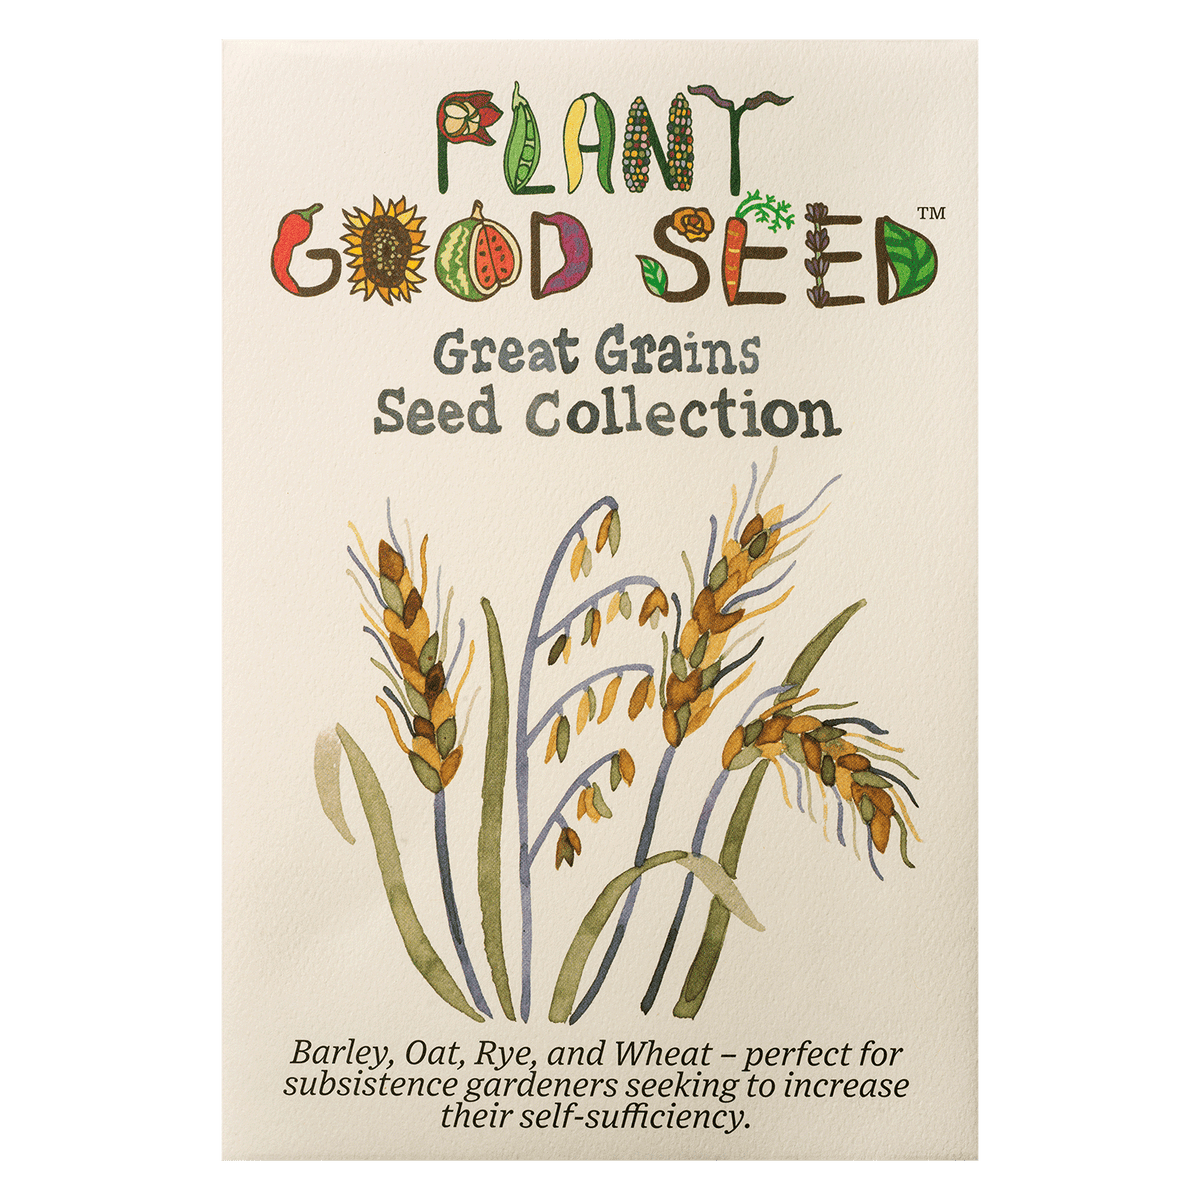 Great Grains Seed Collection